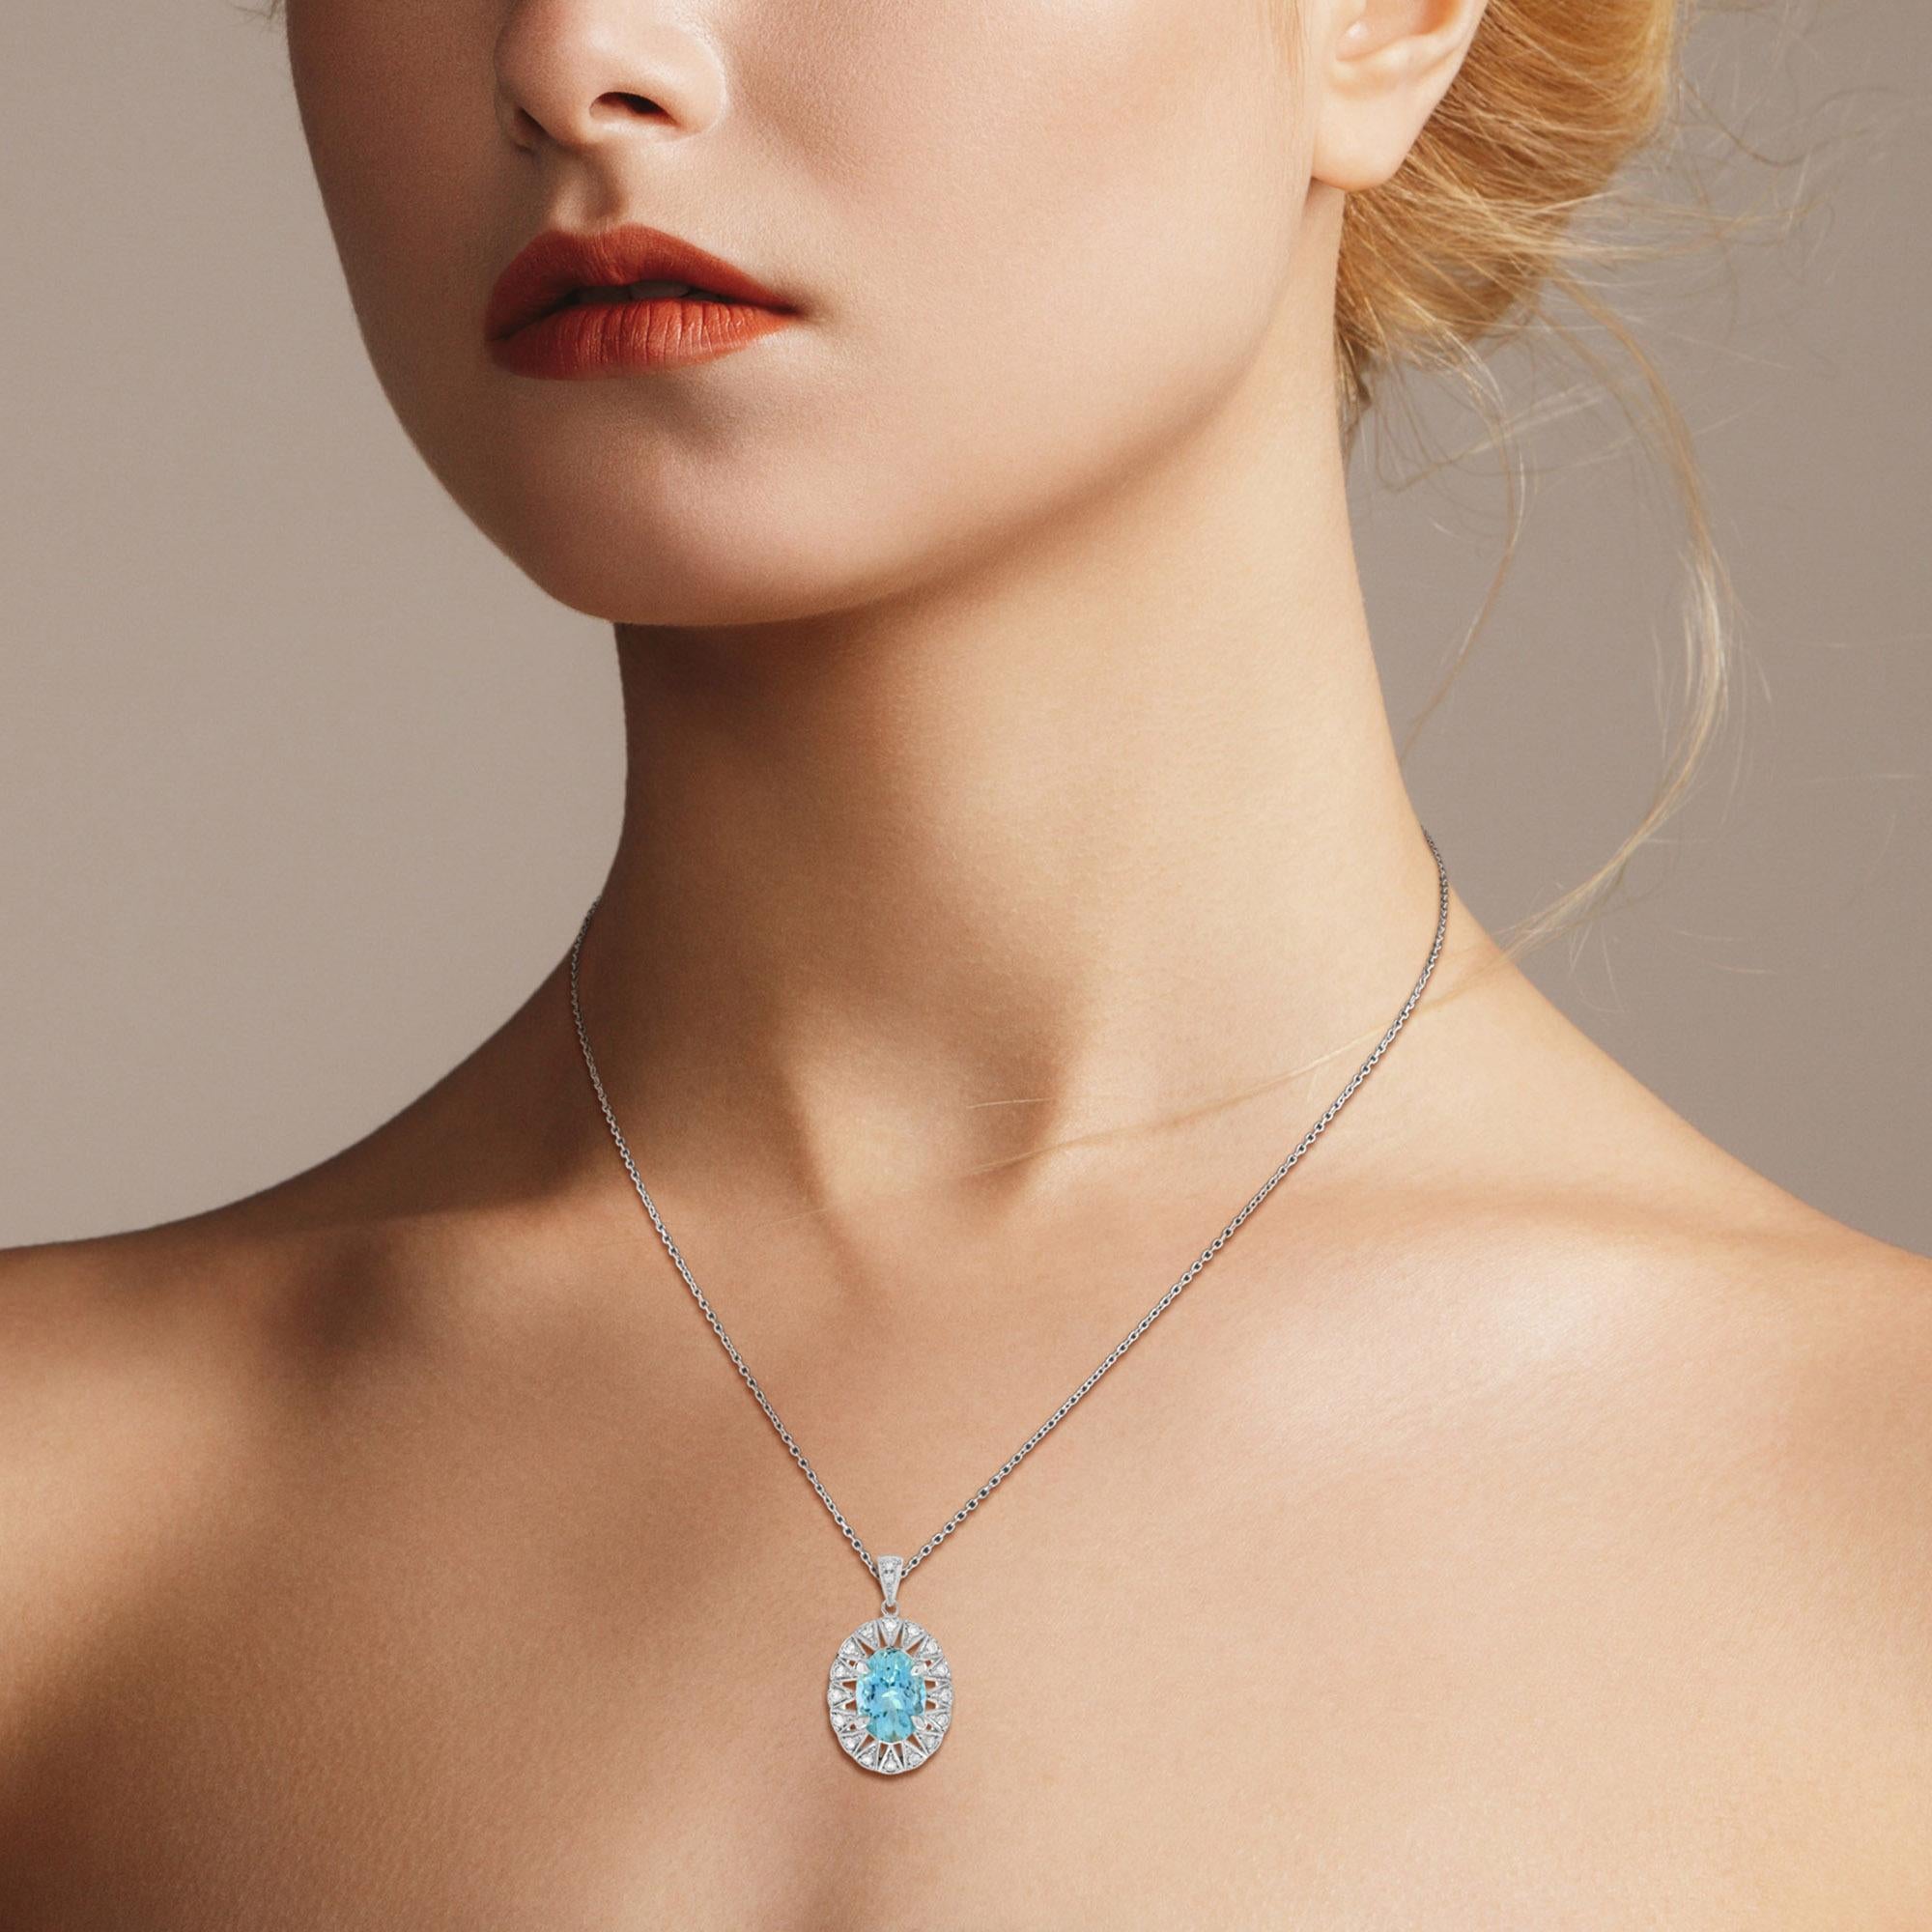 This gorgeous openwork pendant is centered with a 1.5 carat oval aquamarine. The center is accented with fourteen bead set round brilliant cut diamonds with milgrain detailing and a lacy openwork setting. A beautiful, rare, and delicate pendant.